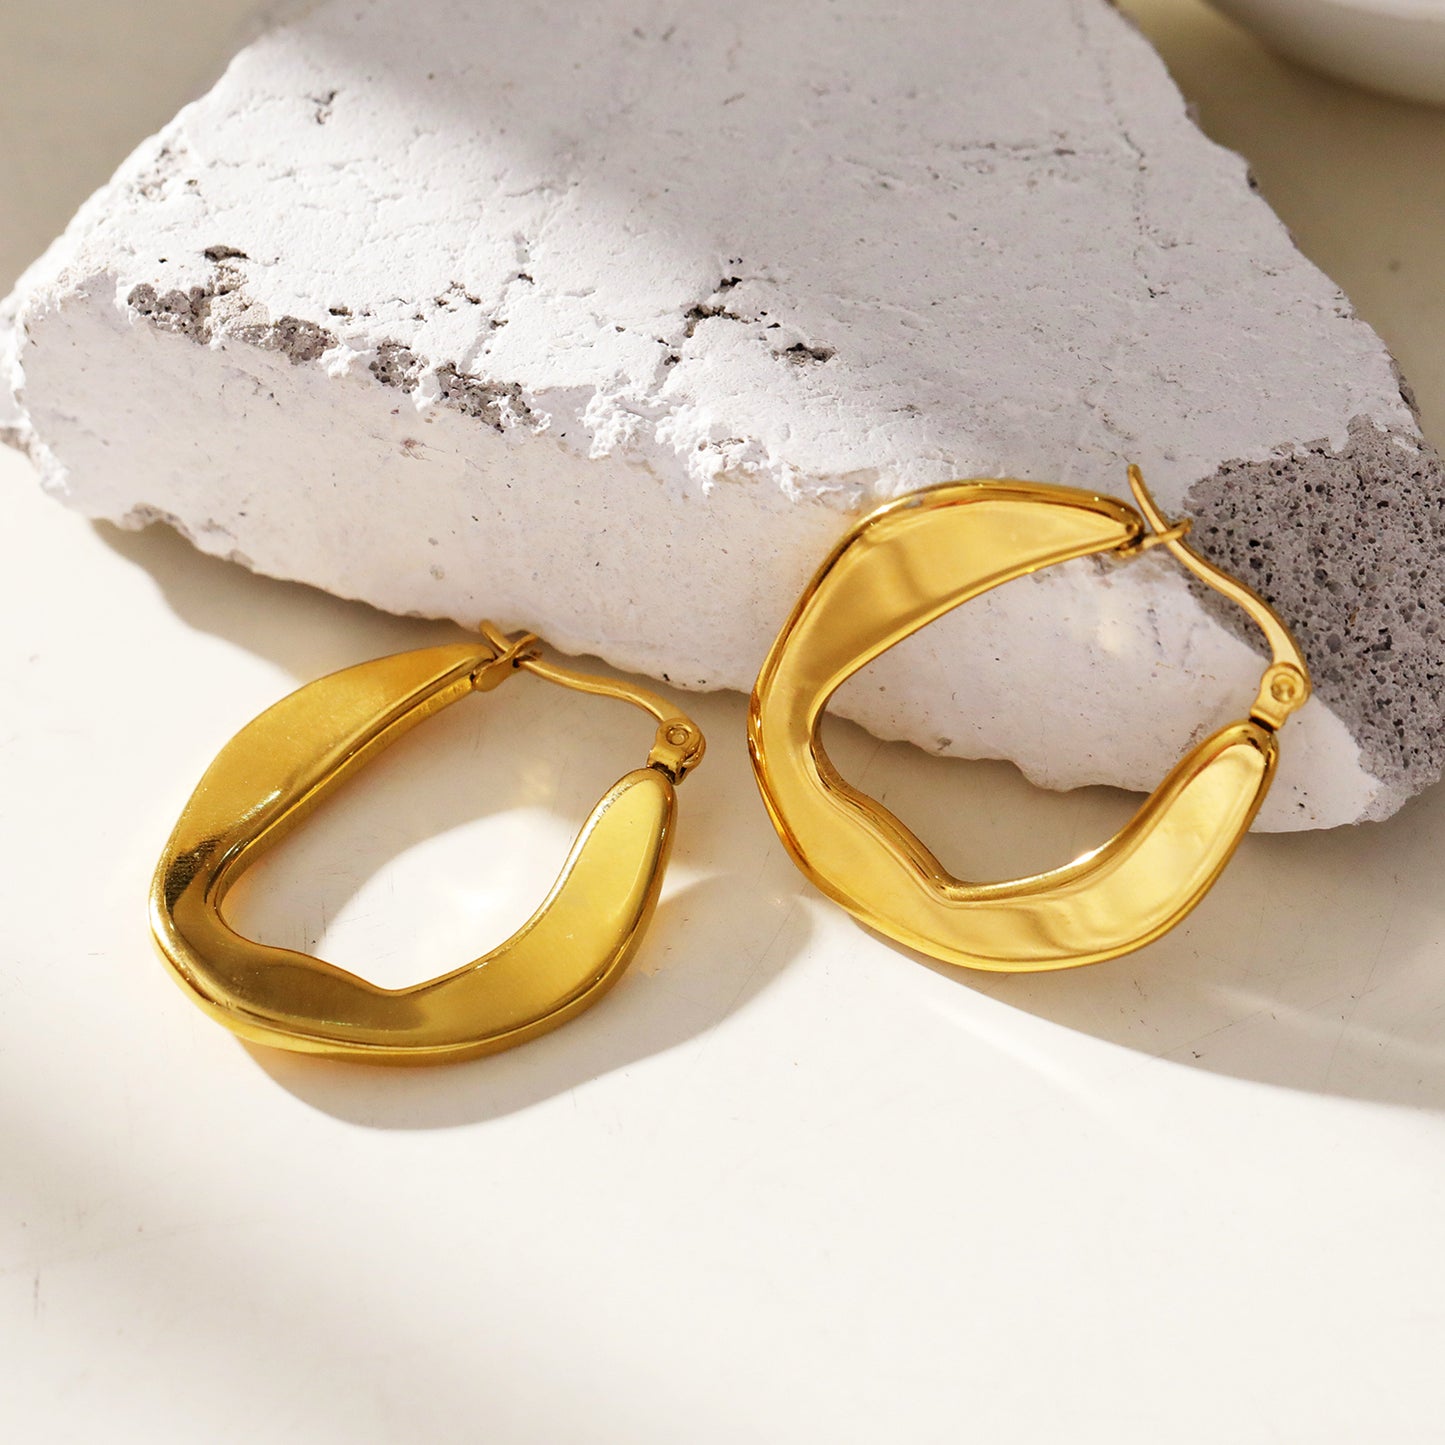 CALIXIA "Sculpted Sophistication: Discover the Allure of Geometric Irregular Hoop Earrings!".